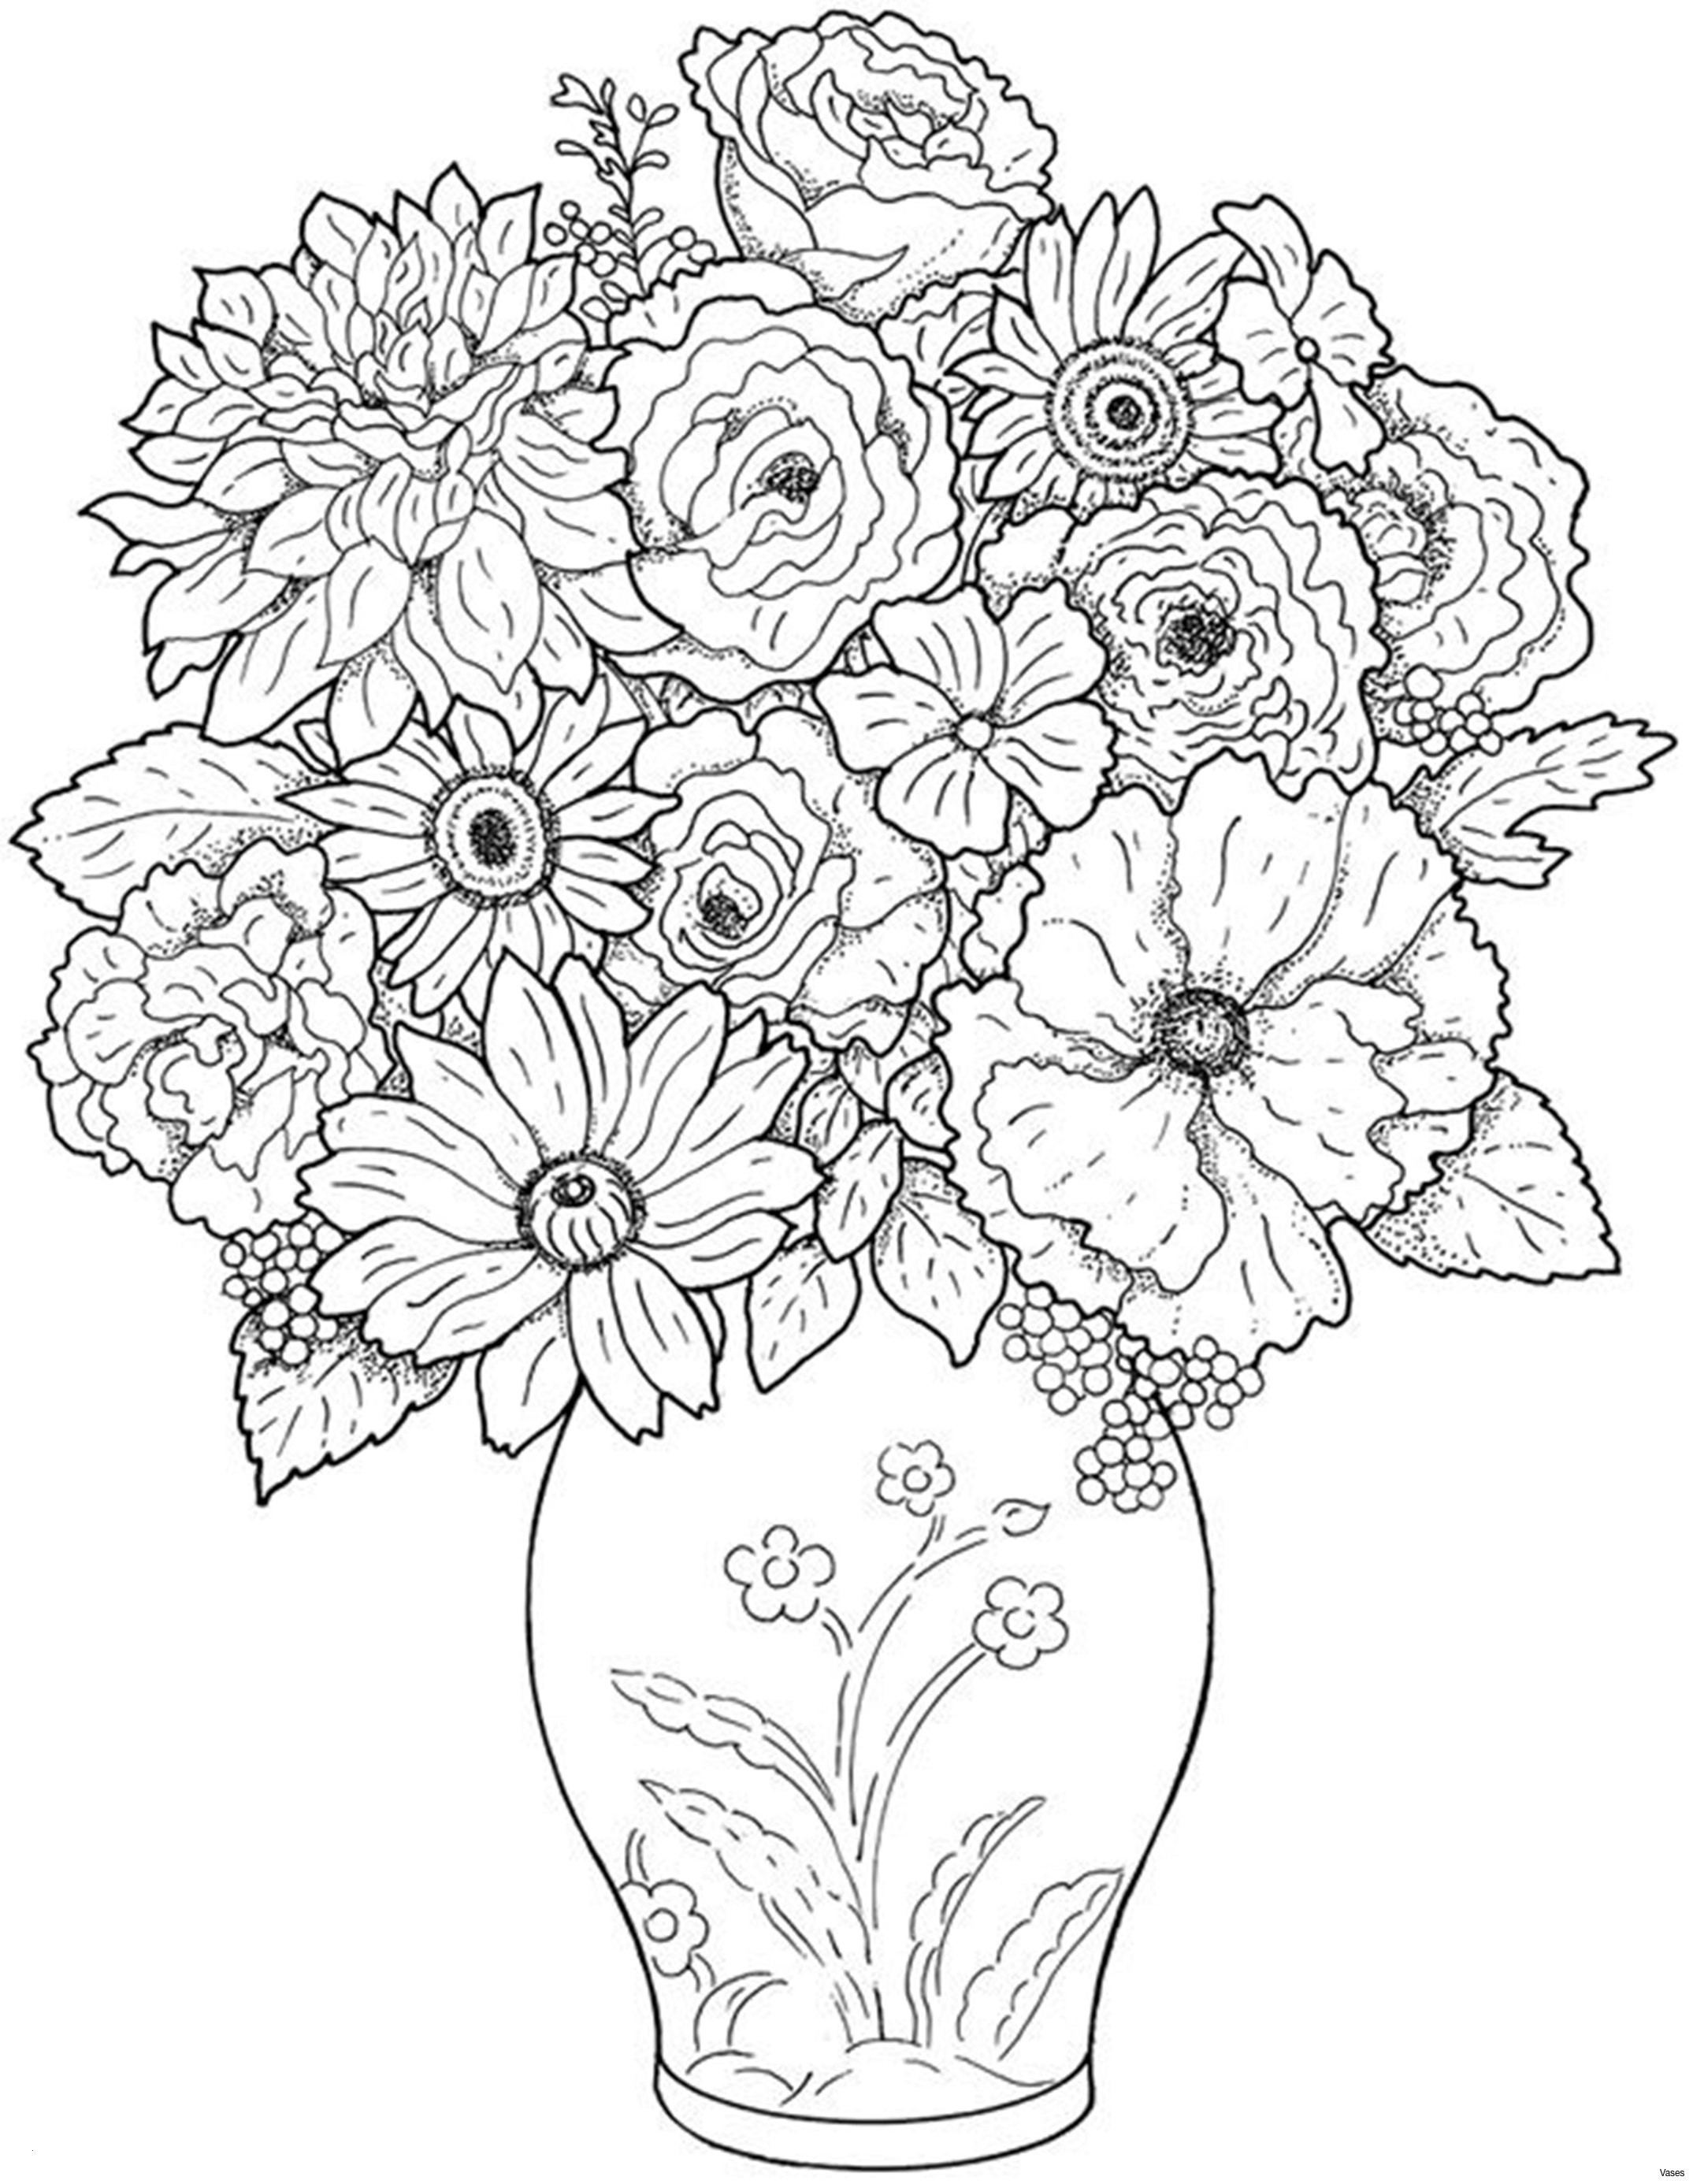 11 Recommended Sunflowers Blue Vase 2024 free download sunflowers blue vase of sunny the sunflower coloring page 34 best fall flowers coloring inside sunny the sunflower coloring page 34 best fall flowers coloring pages cloud9vegas